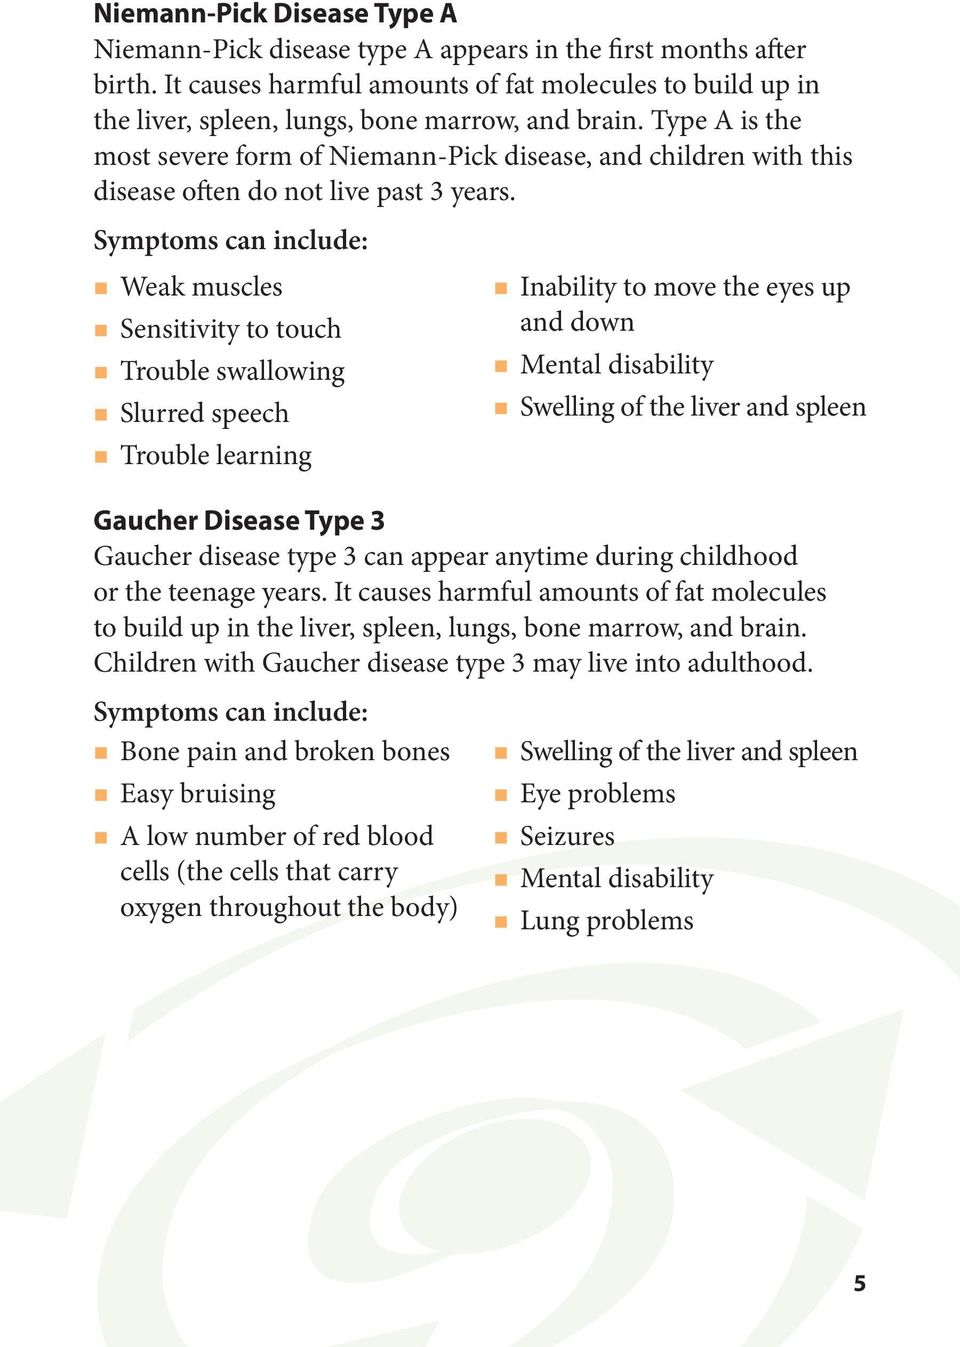 Type A is the most severe form of Niemann-Pick disease, and children with this disease often do not live past 3 years.